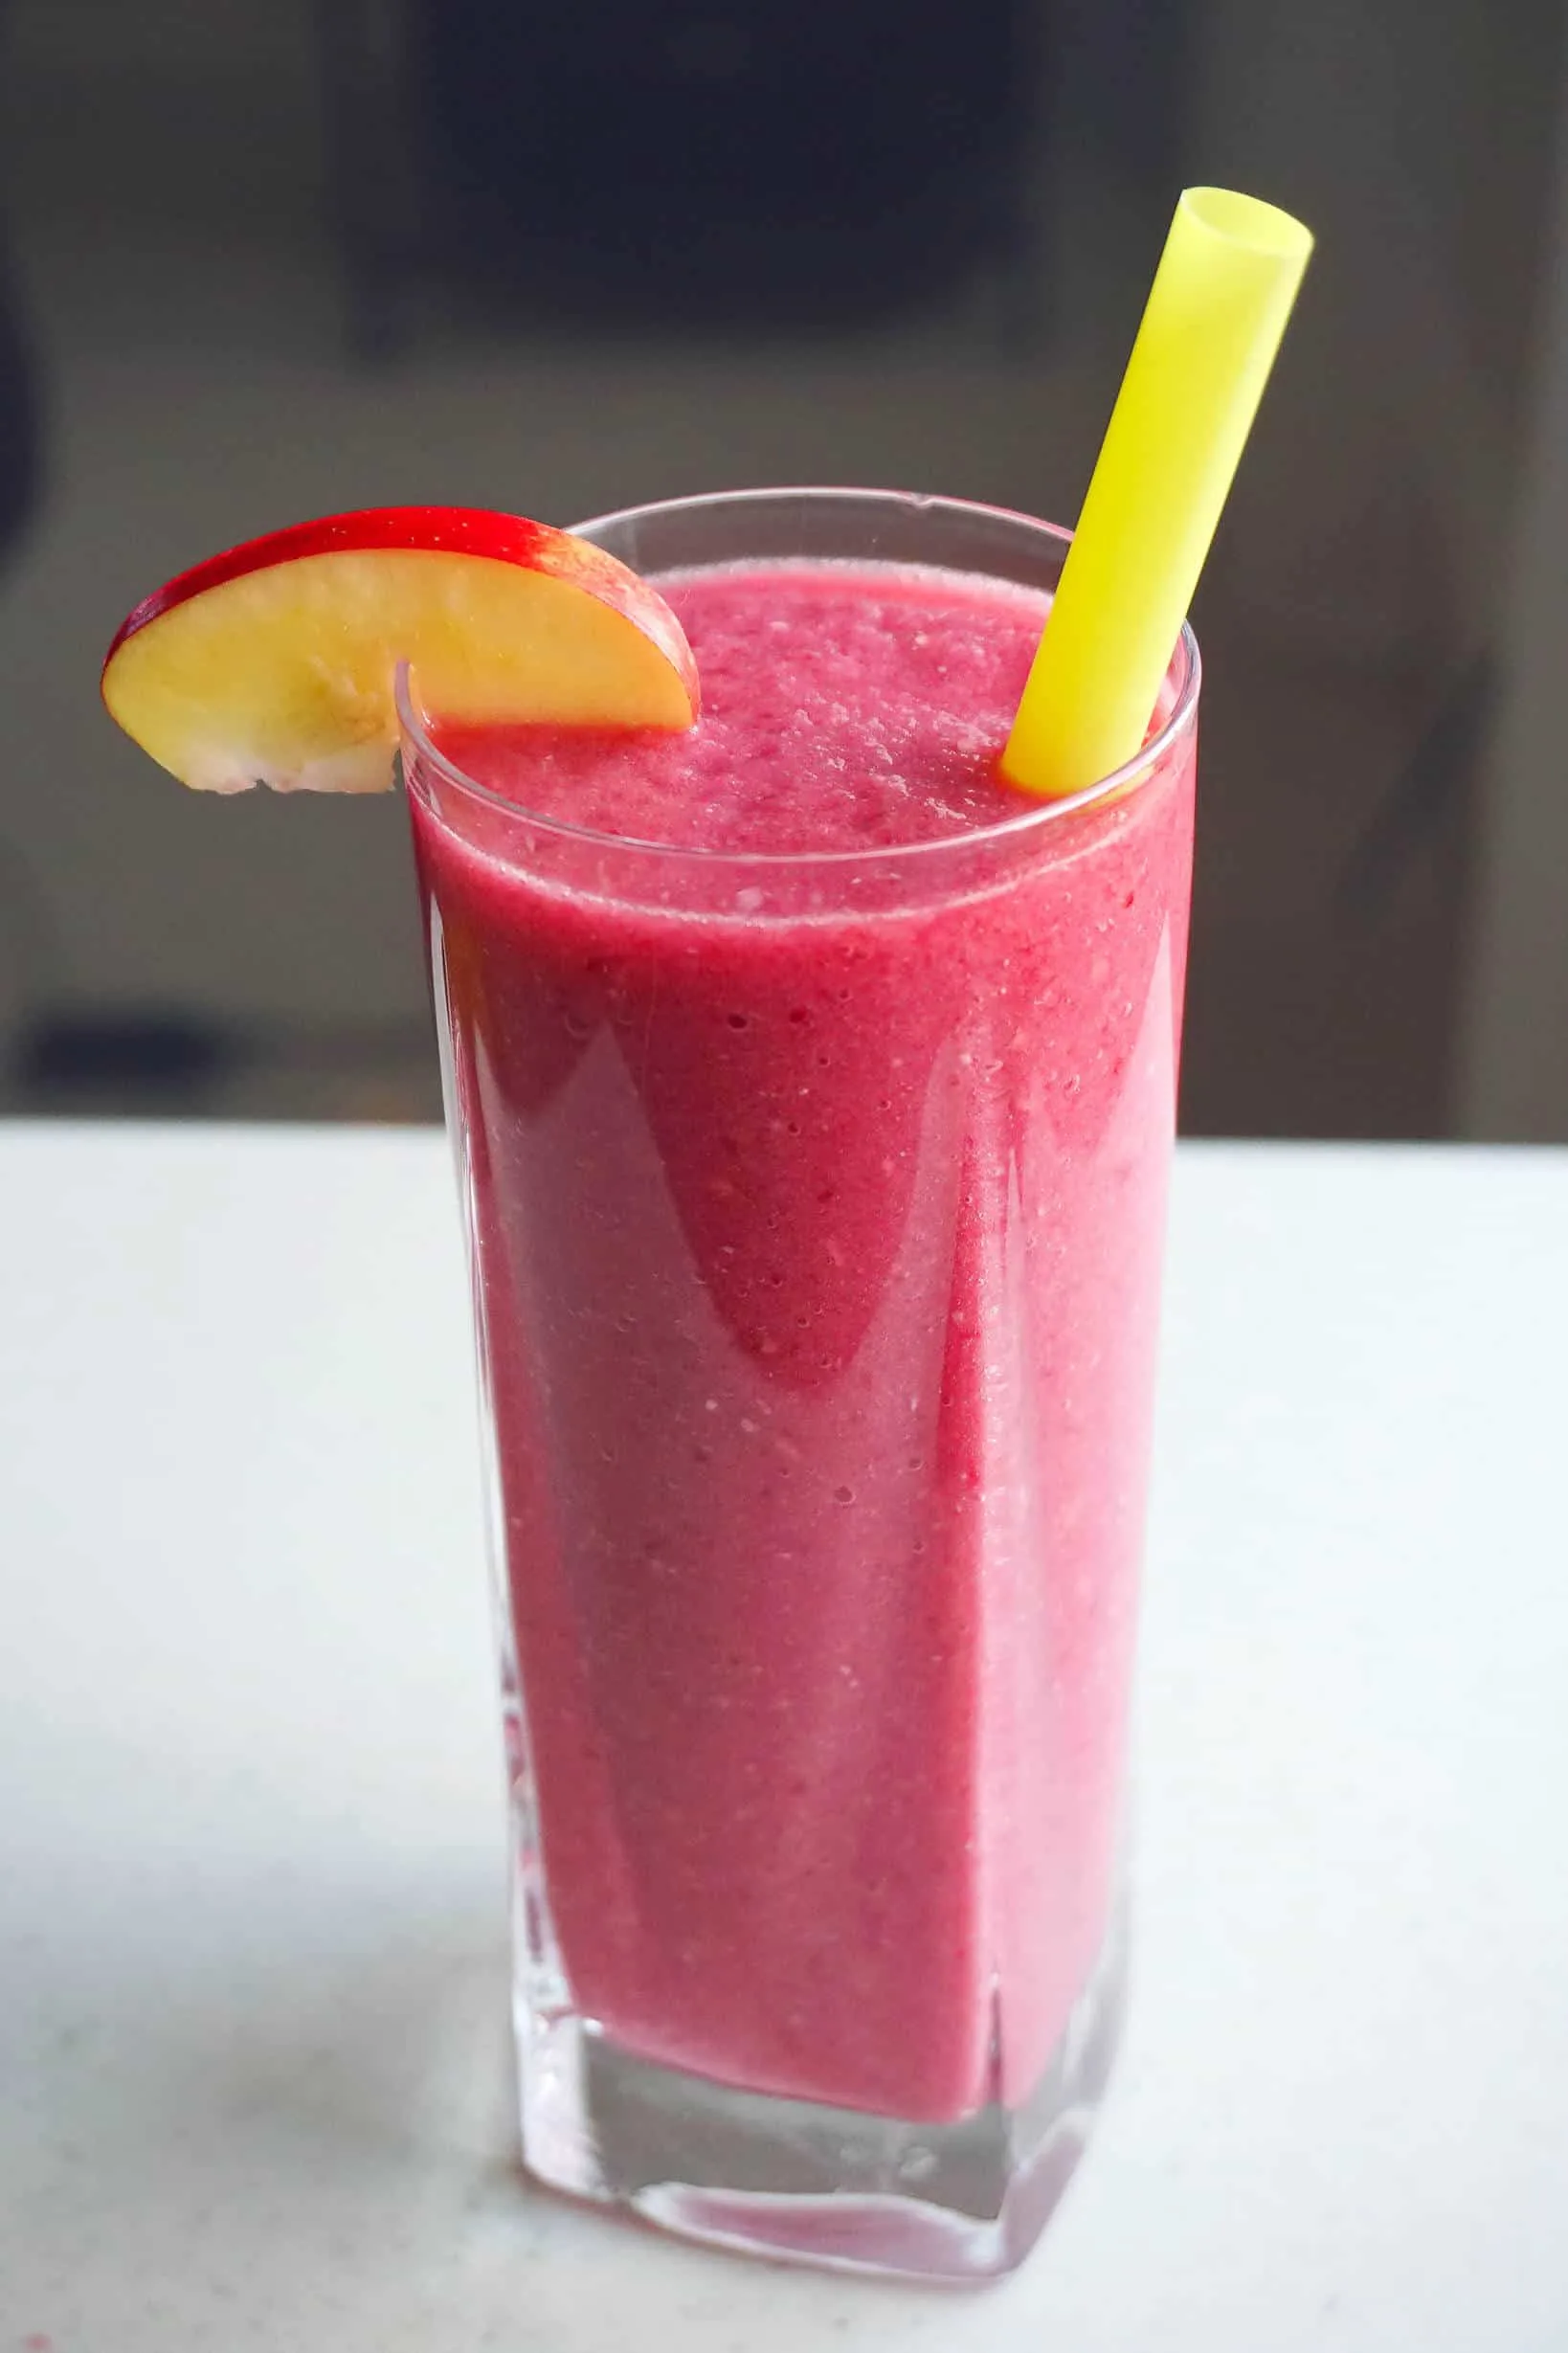 Apple Pomegranate Smoothie - a healthy meal replacement smoothie recipe perfect for breakfast or a snack for your clean eating diet.